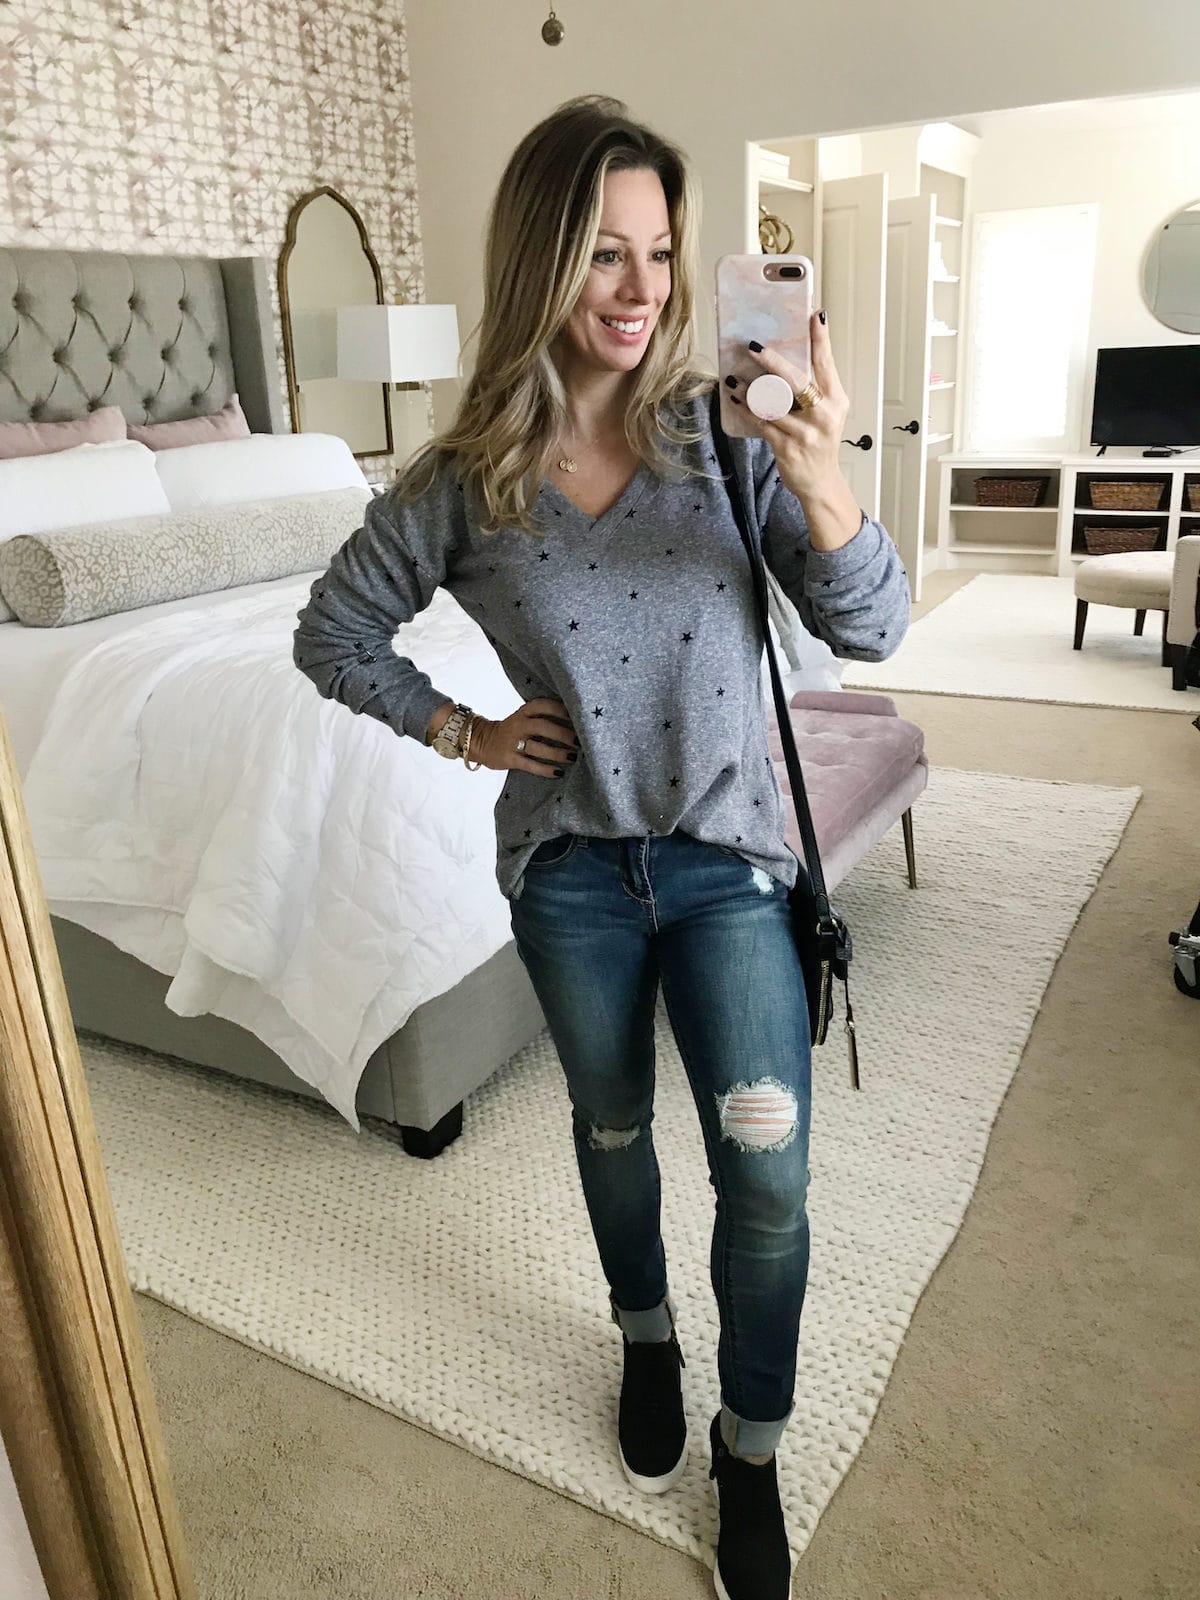 Jeans Outfit Ideas: 9 Super Cute Ways To Style Your Denim This Fall -  Lulus.com Fashion Blog